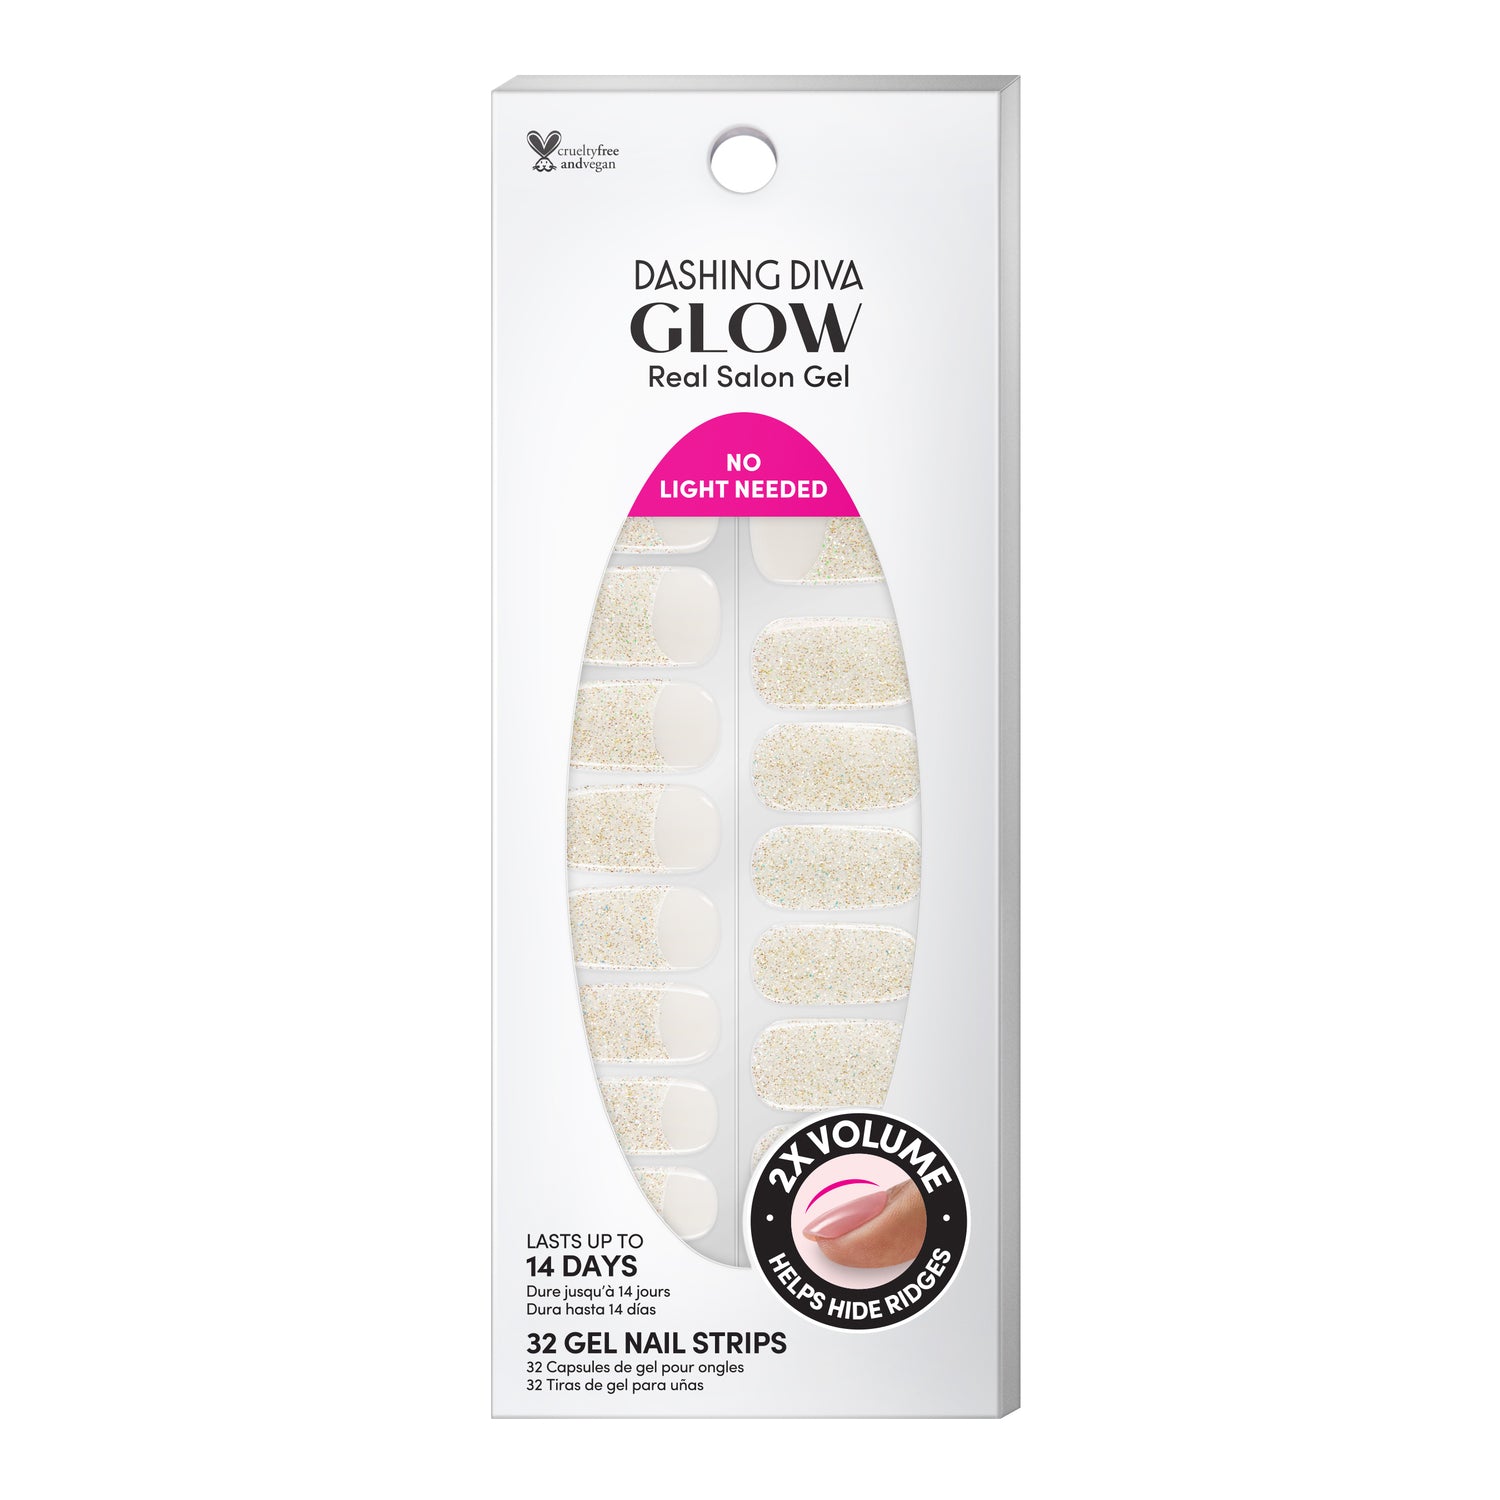 Sheer beige gel nail strips featuring iridescent champagne glitter and glittered french tips with a double gel formula with an ultra-smooth finish.